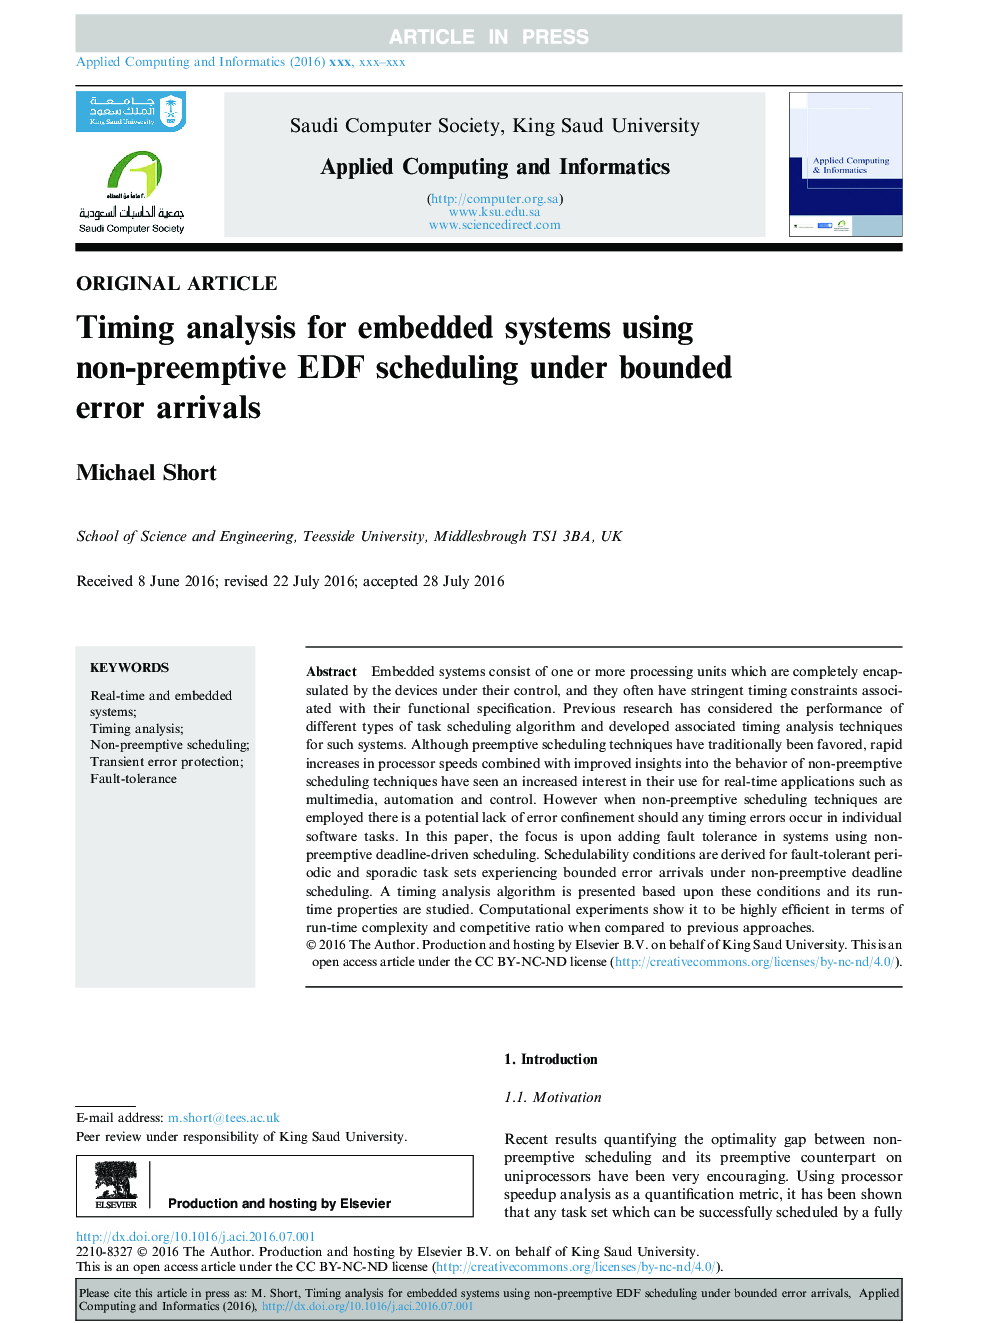 Timing analysis for embedded systems using non-preemptive EDF scheduling under bounded error arrivals